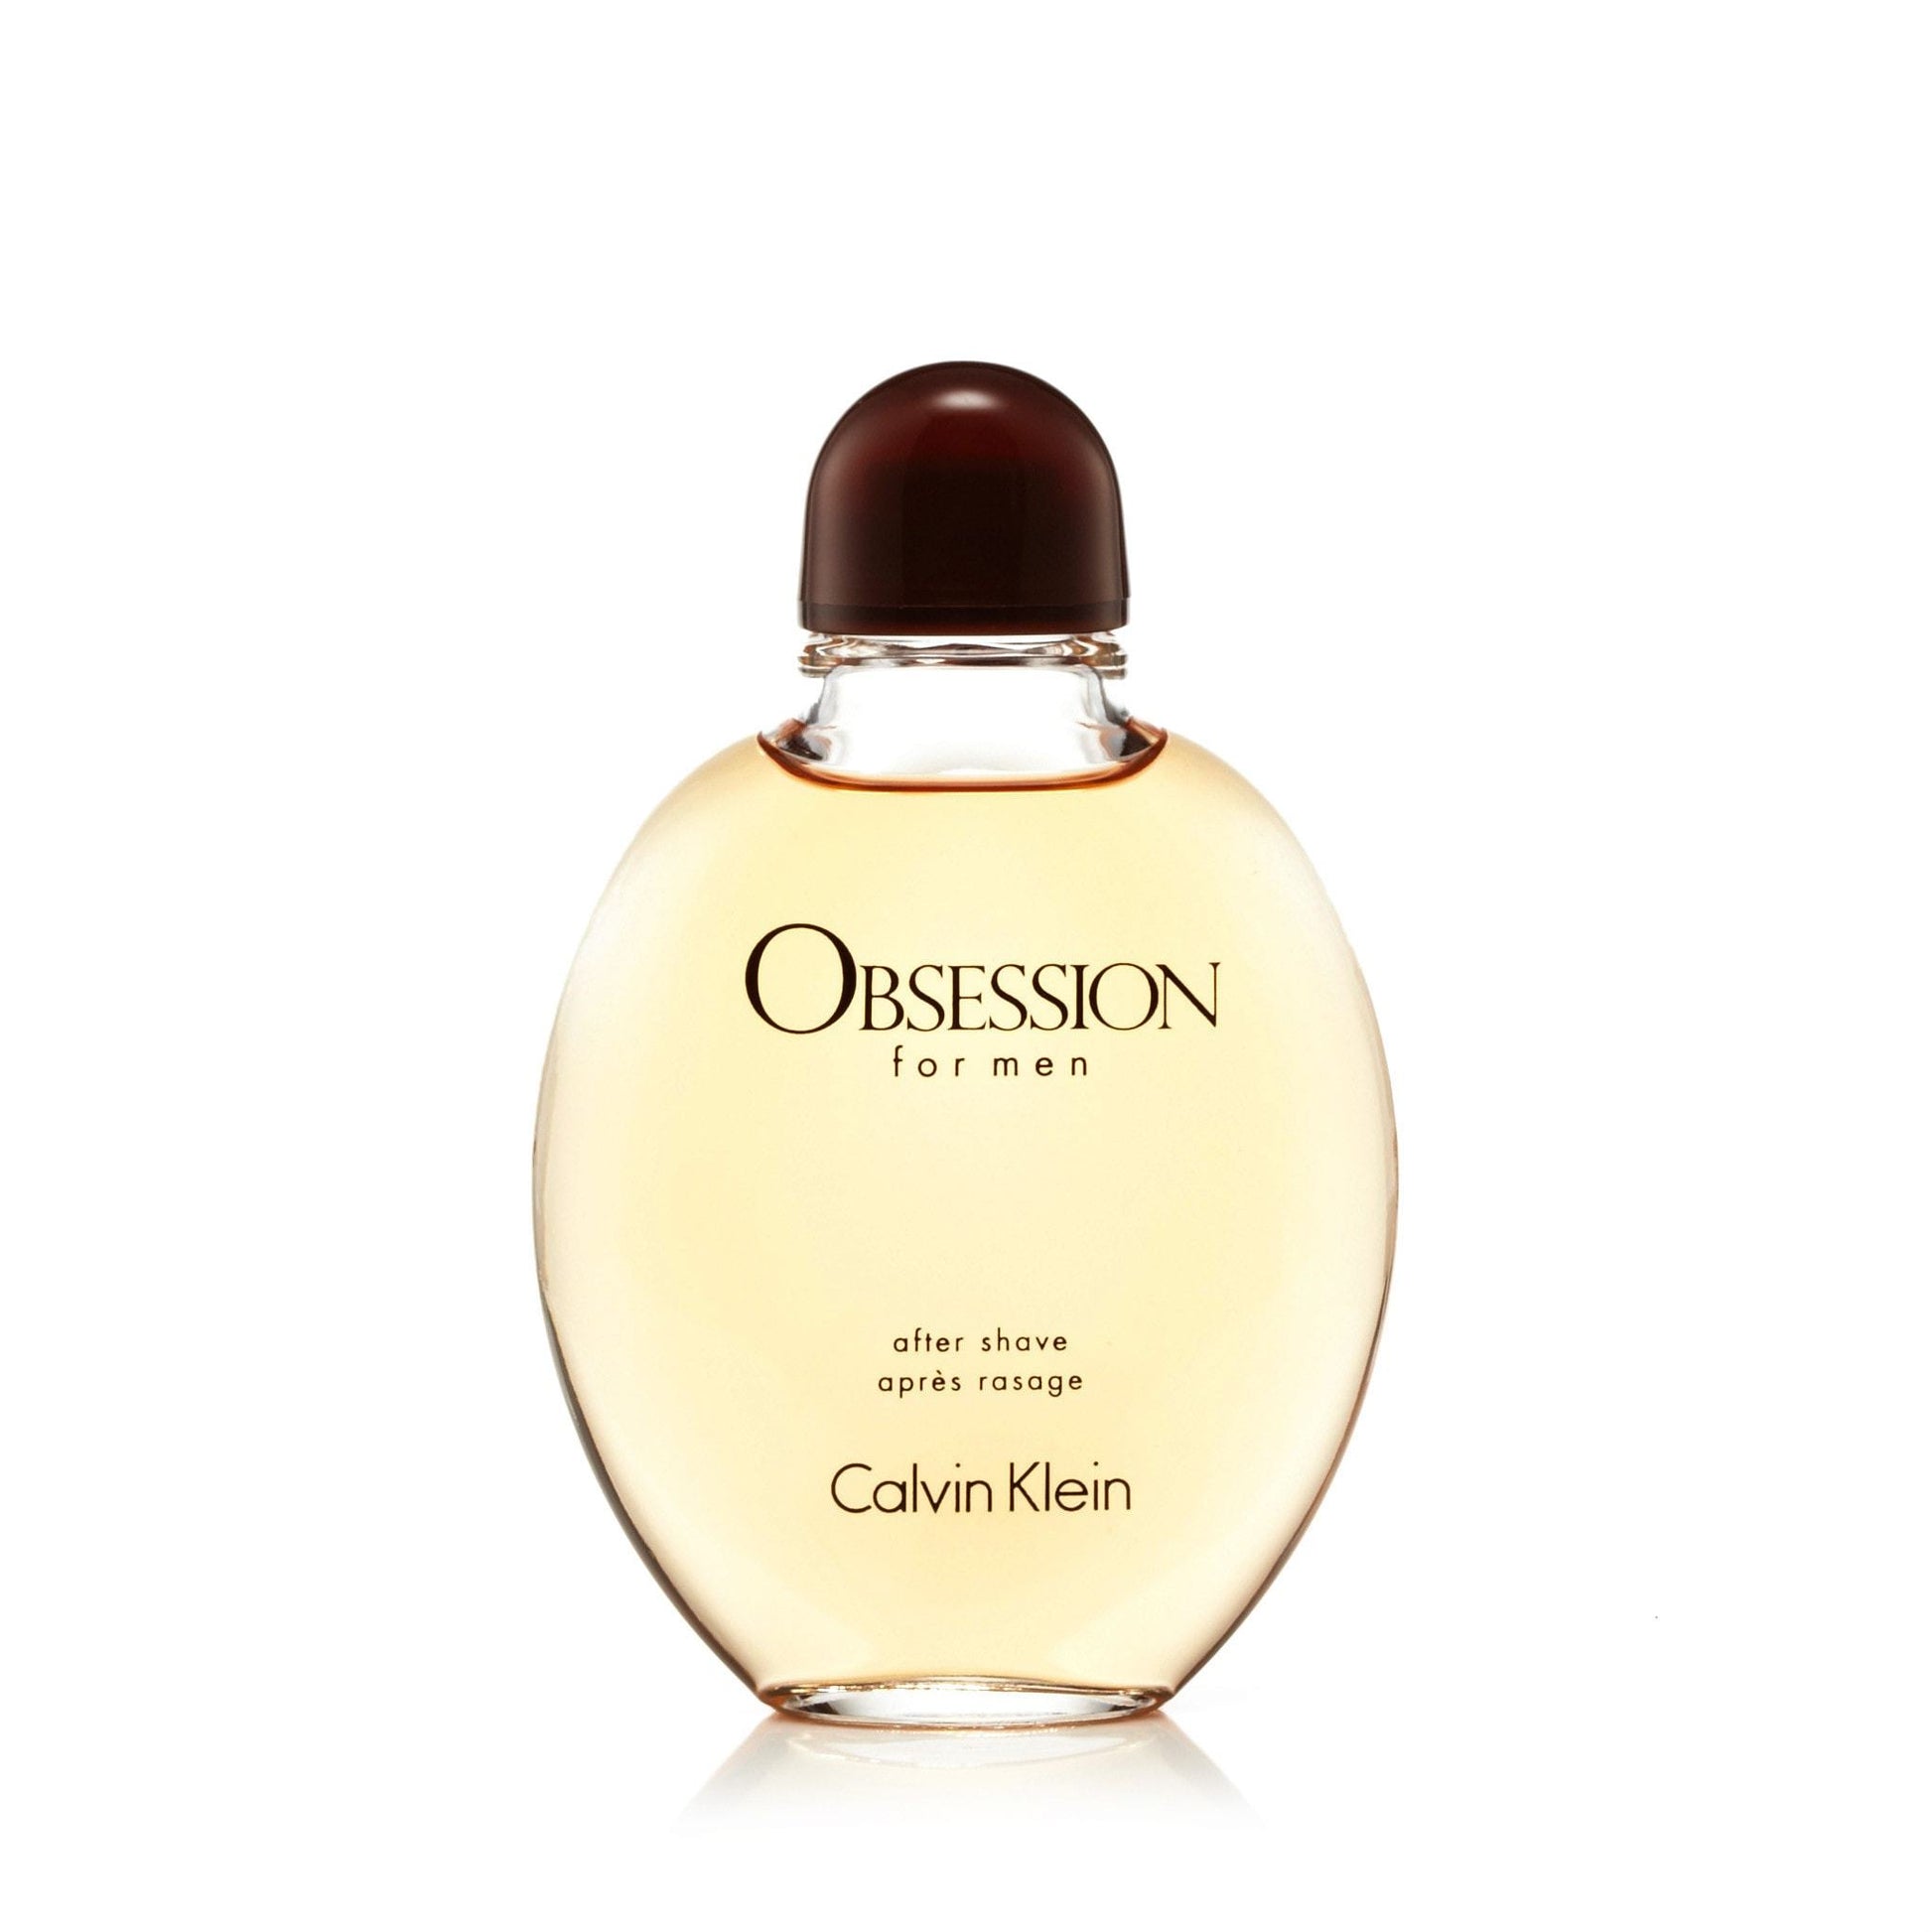 Obsession After Shave for Men by Calvin Klein, Product image 1